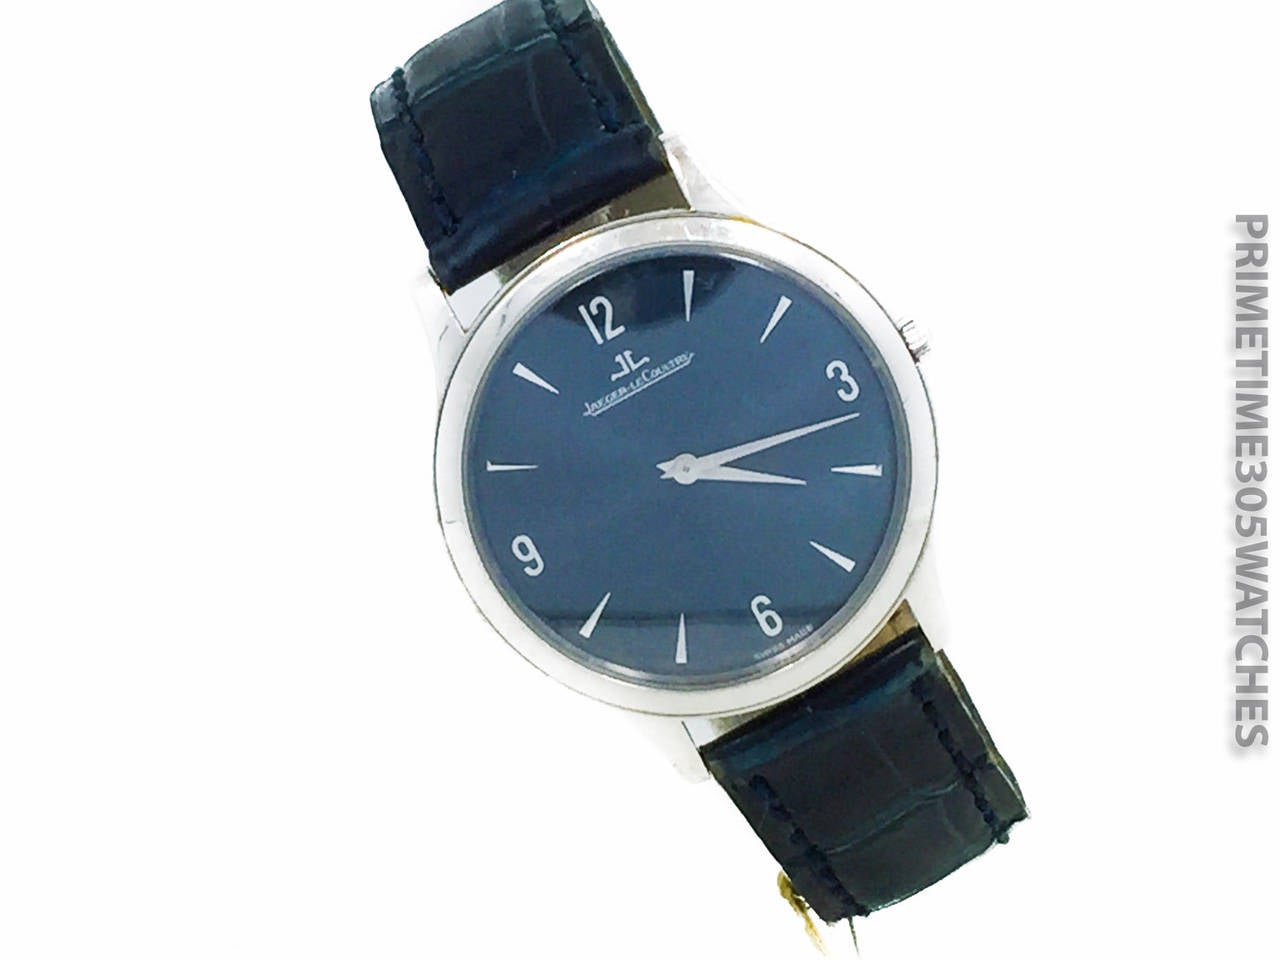 Mens Jaeger LeCoultre Master Control Ultra Thin in Platinum W/ Blue Dial, Limited Edition of 250 Pieces. The Watch is in Good Condition W/ Some Normal Signs Of Wear, It Features a Manual Wind Movement which is Working Perfectly. The Watch is on a